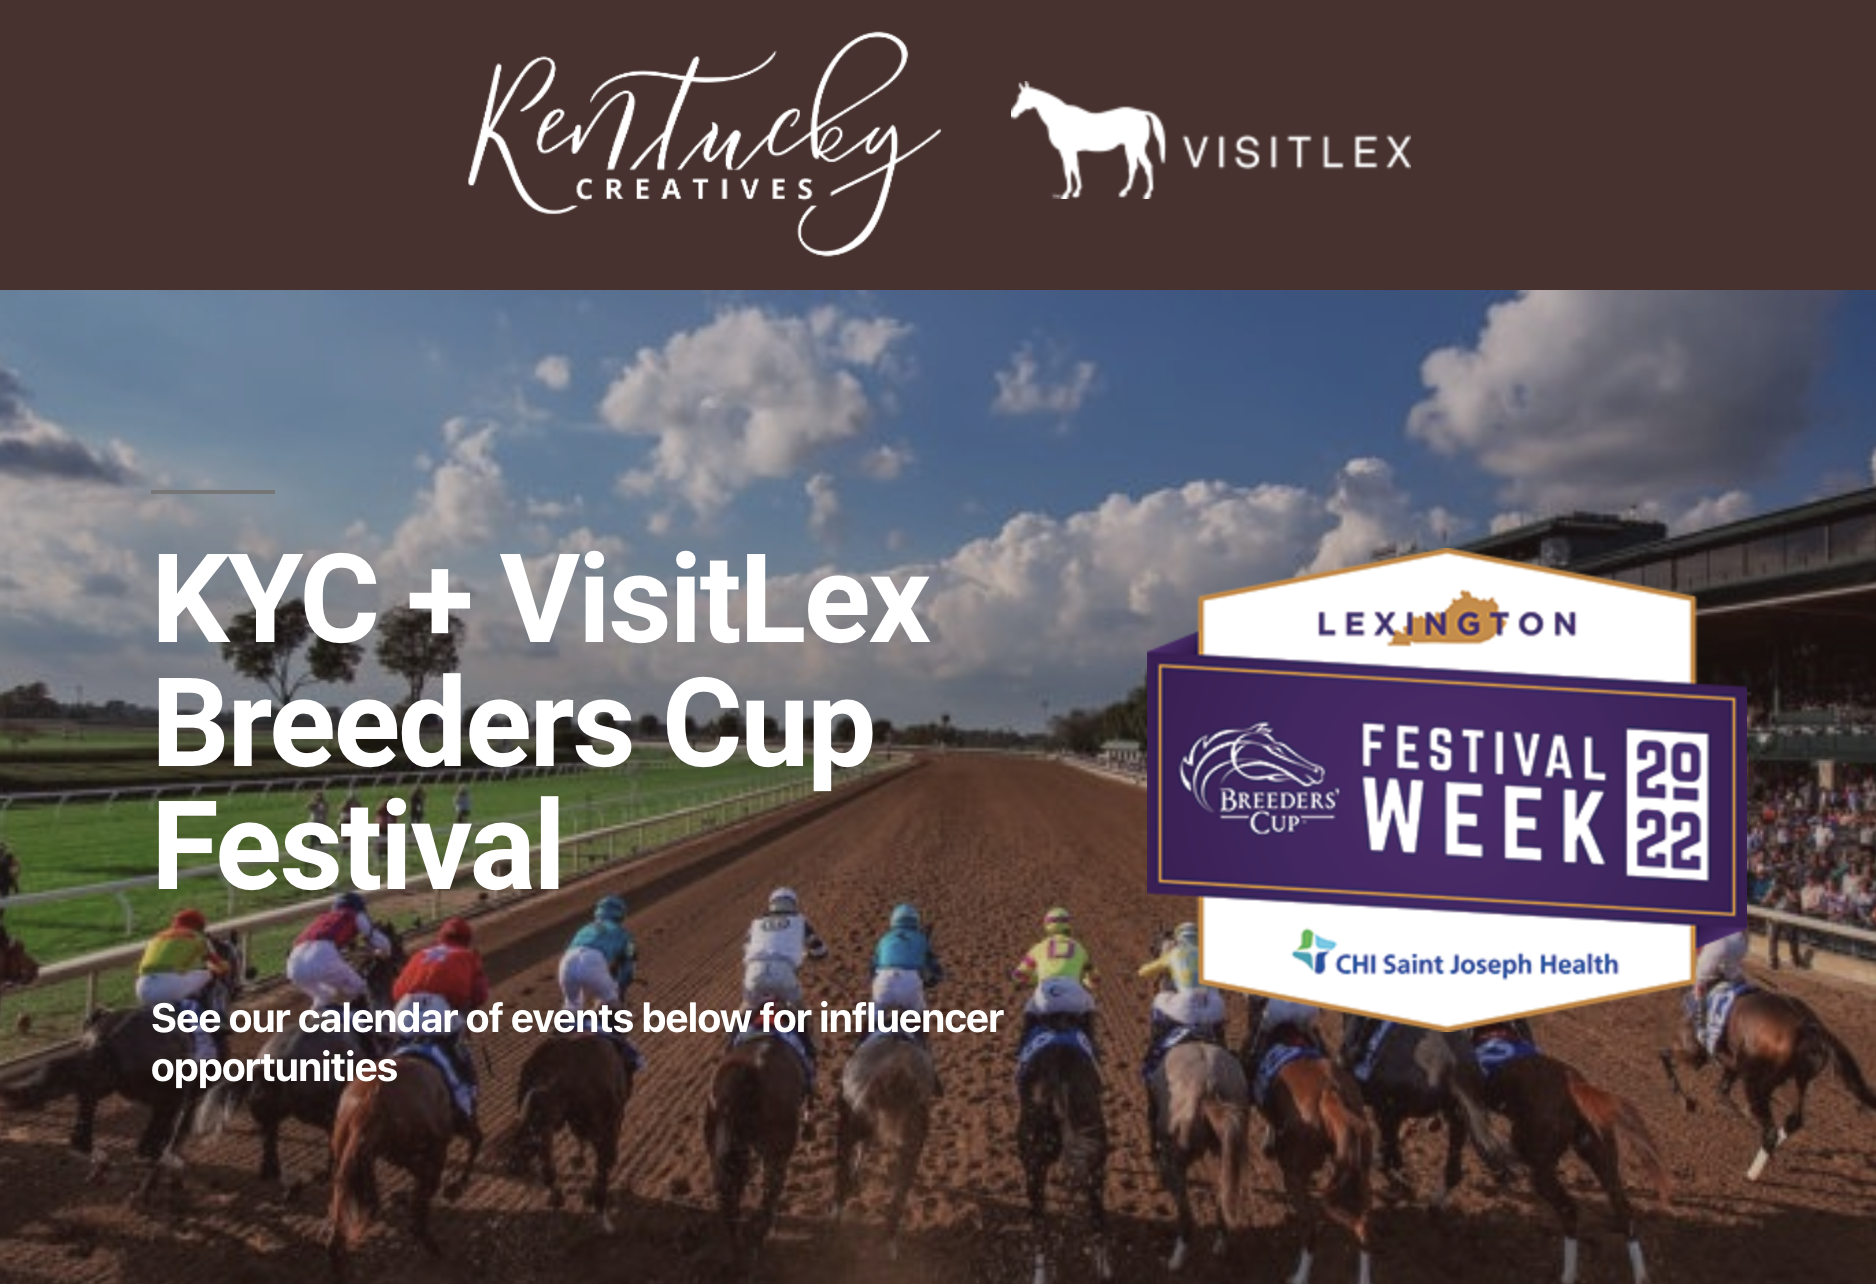 KYC + VisitLex Team Up For Breeders’ Cup Festival In Lexington